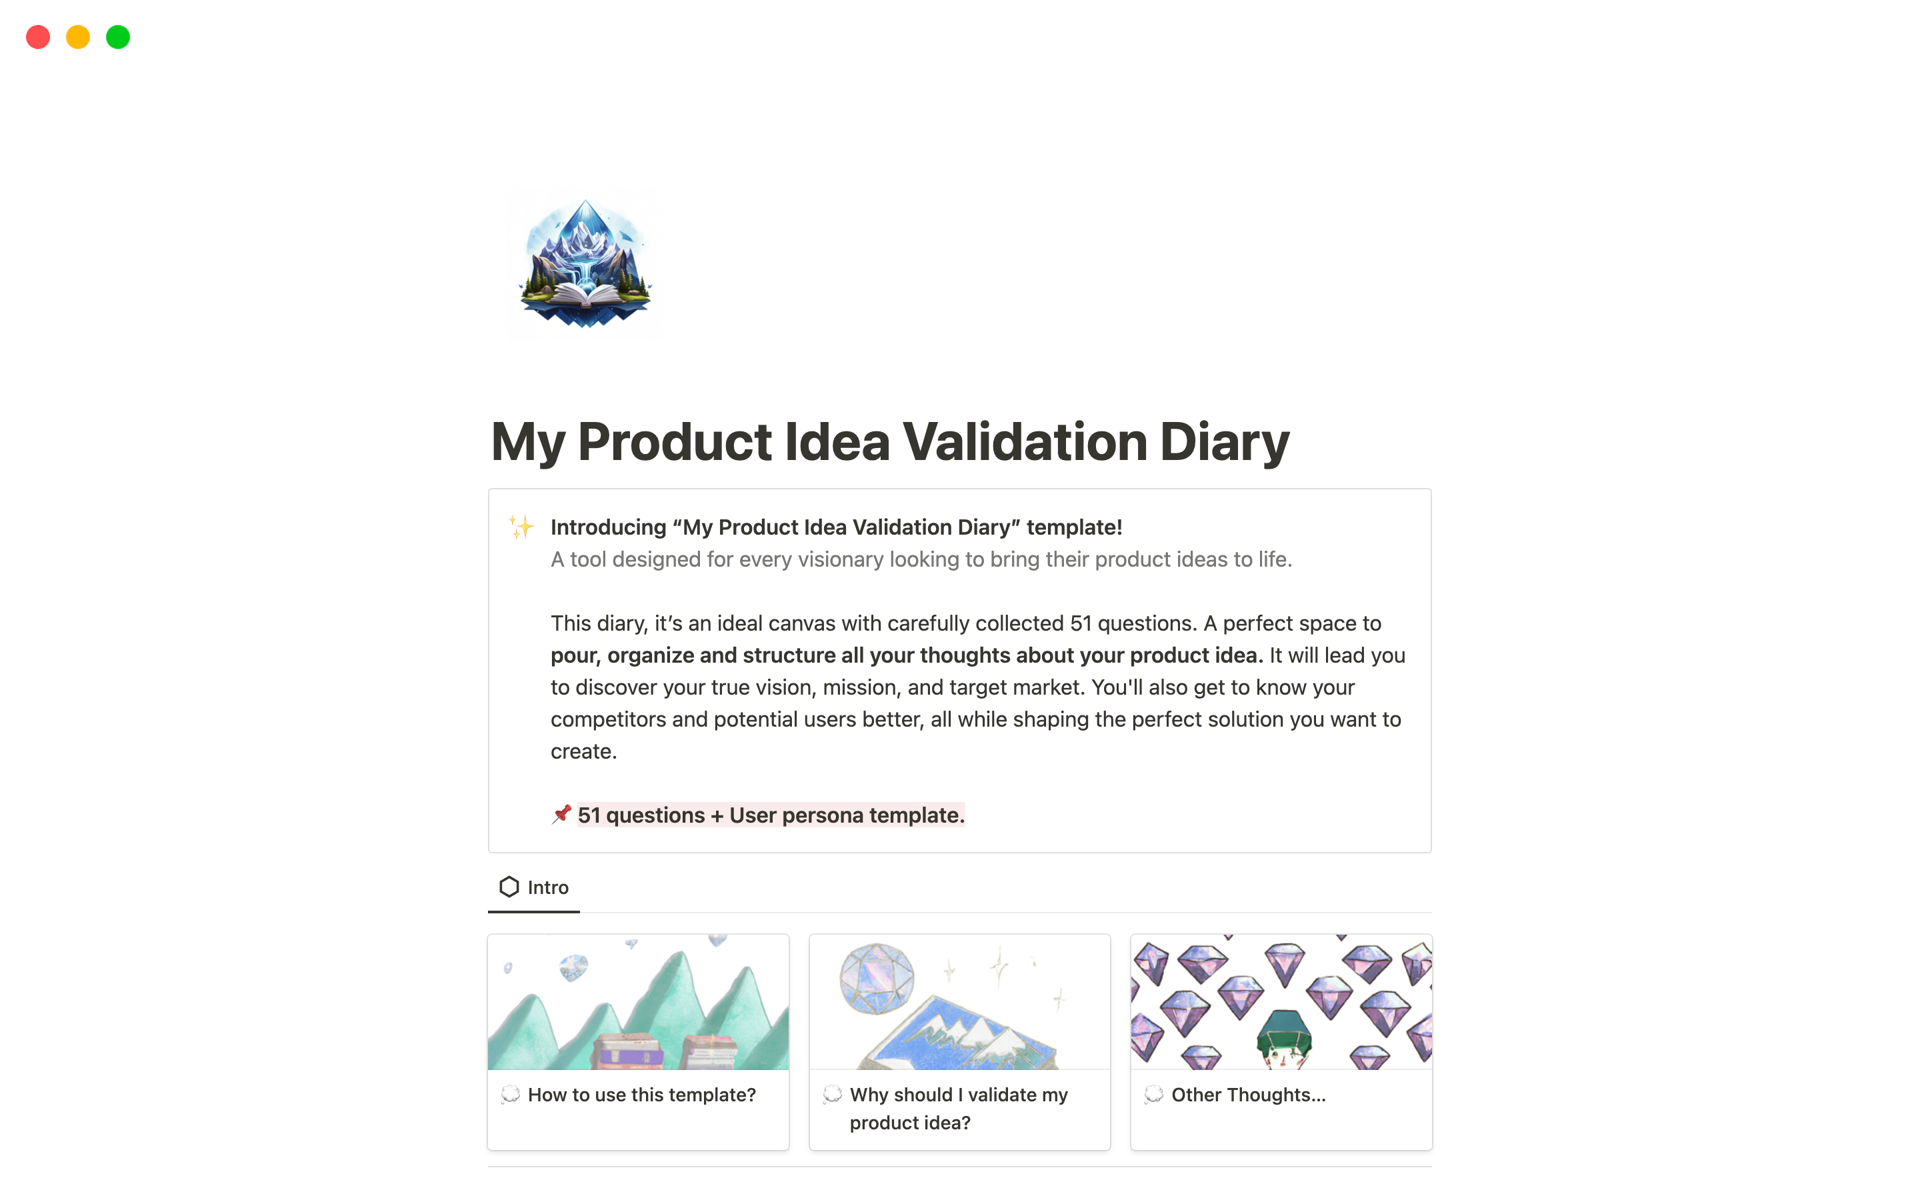 Introducing “My Product Idea Validation Diary” template! 